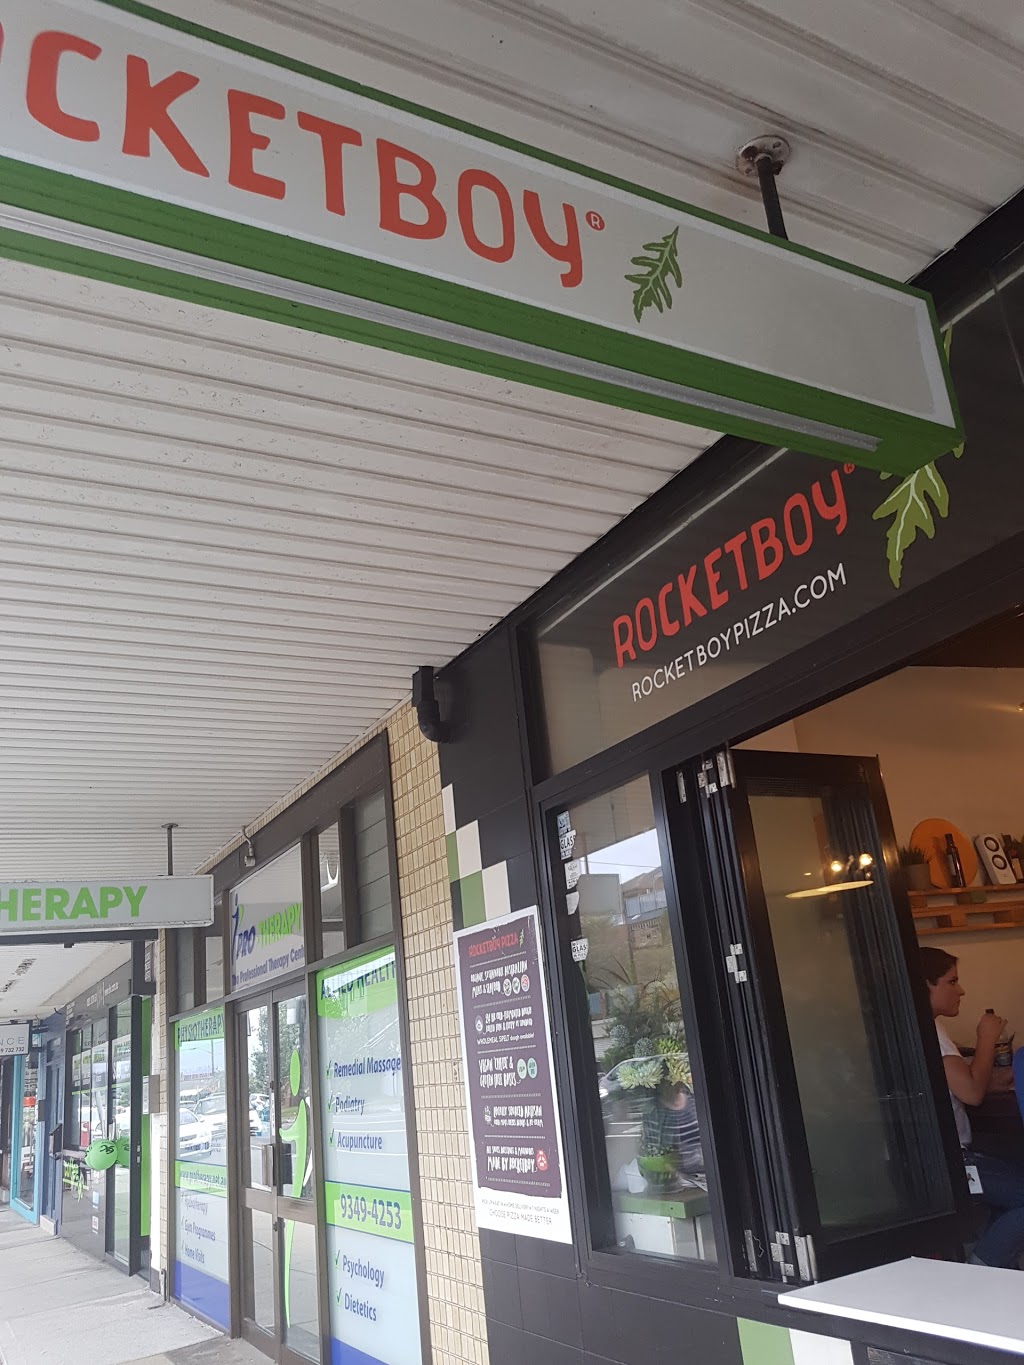 Rocketboy Pizza | meal delivery | 323 Malabar Rd, Maroubra NSW 2035, Australia | 0293444111 OR +61 2 9344 4111